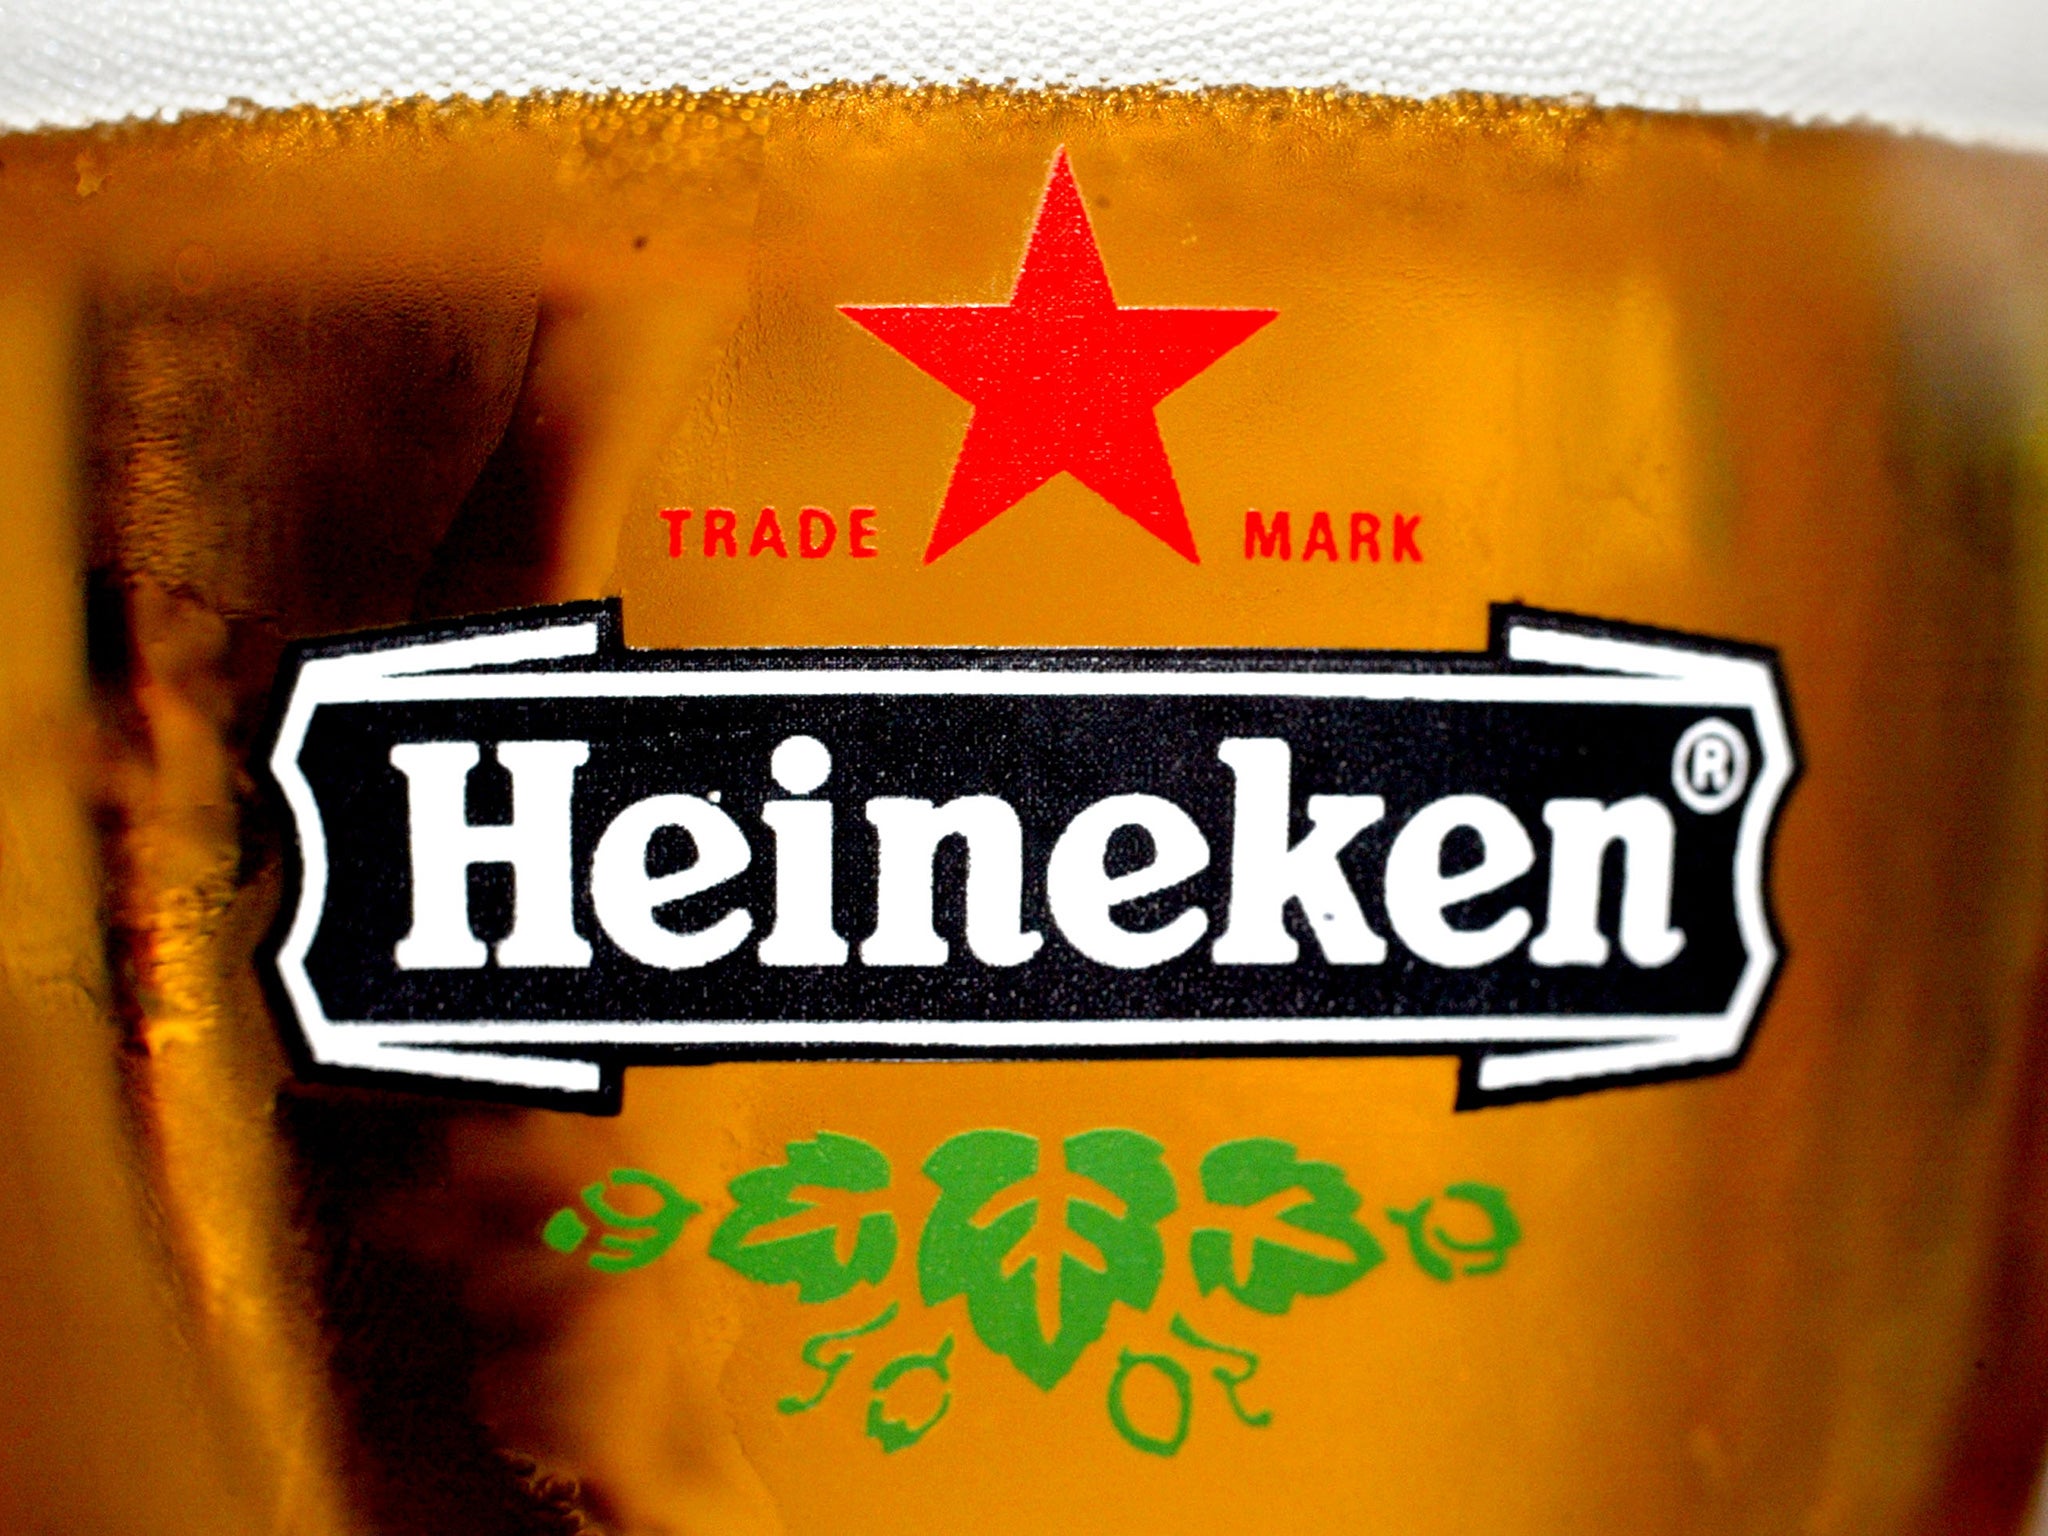 saudi-arabia-confiscates-heineken-beer-at-the-border-is-it-so-wrong-to-want-a-drink-in-the